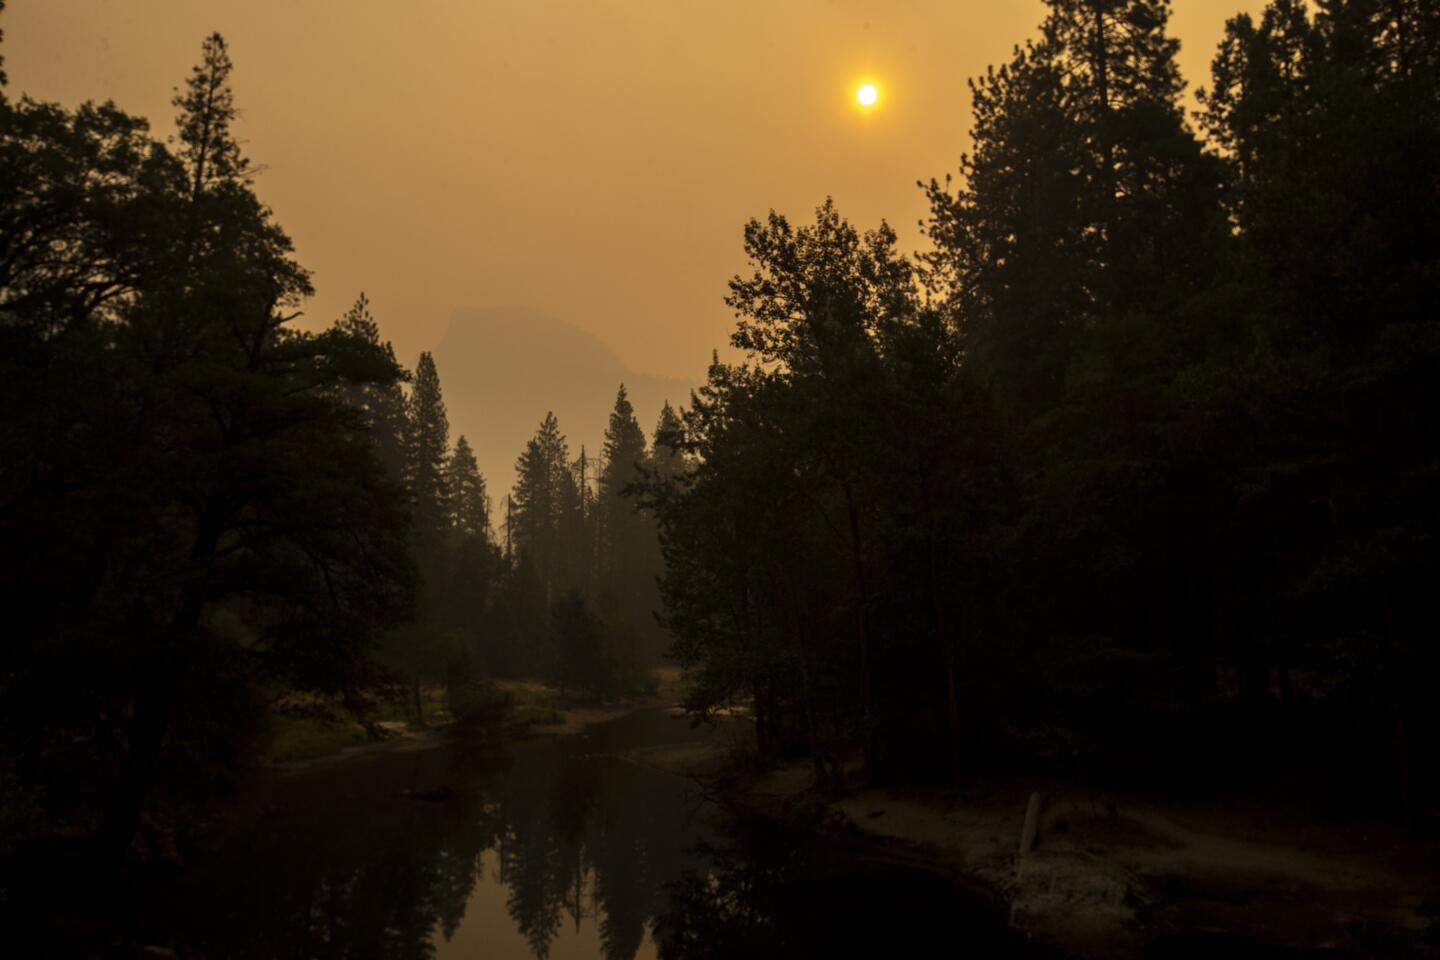 Tall trees are silhouetted against a smoky orange sky.